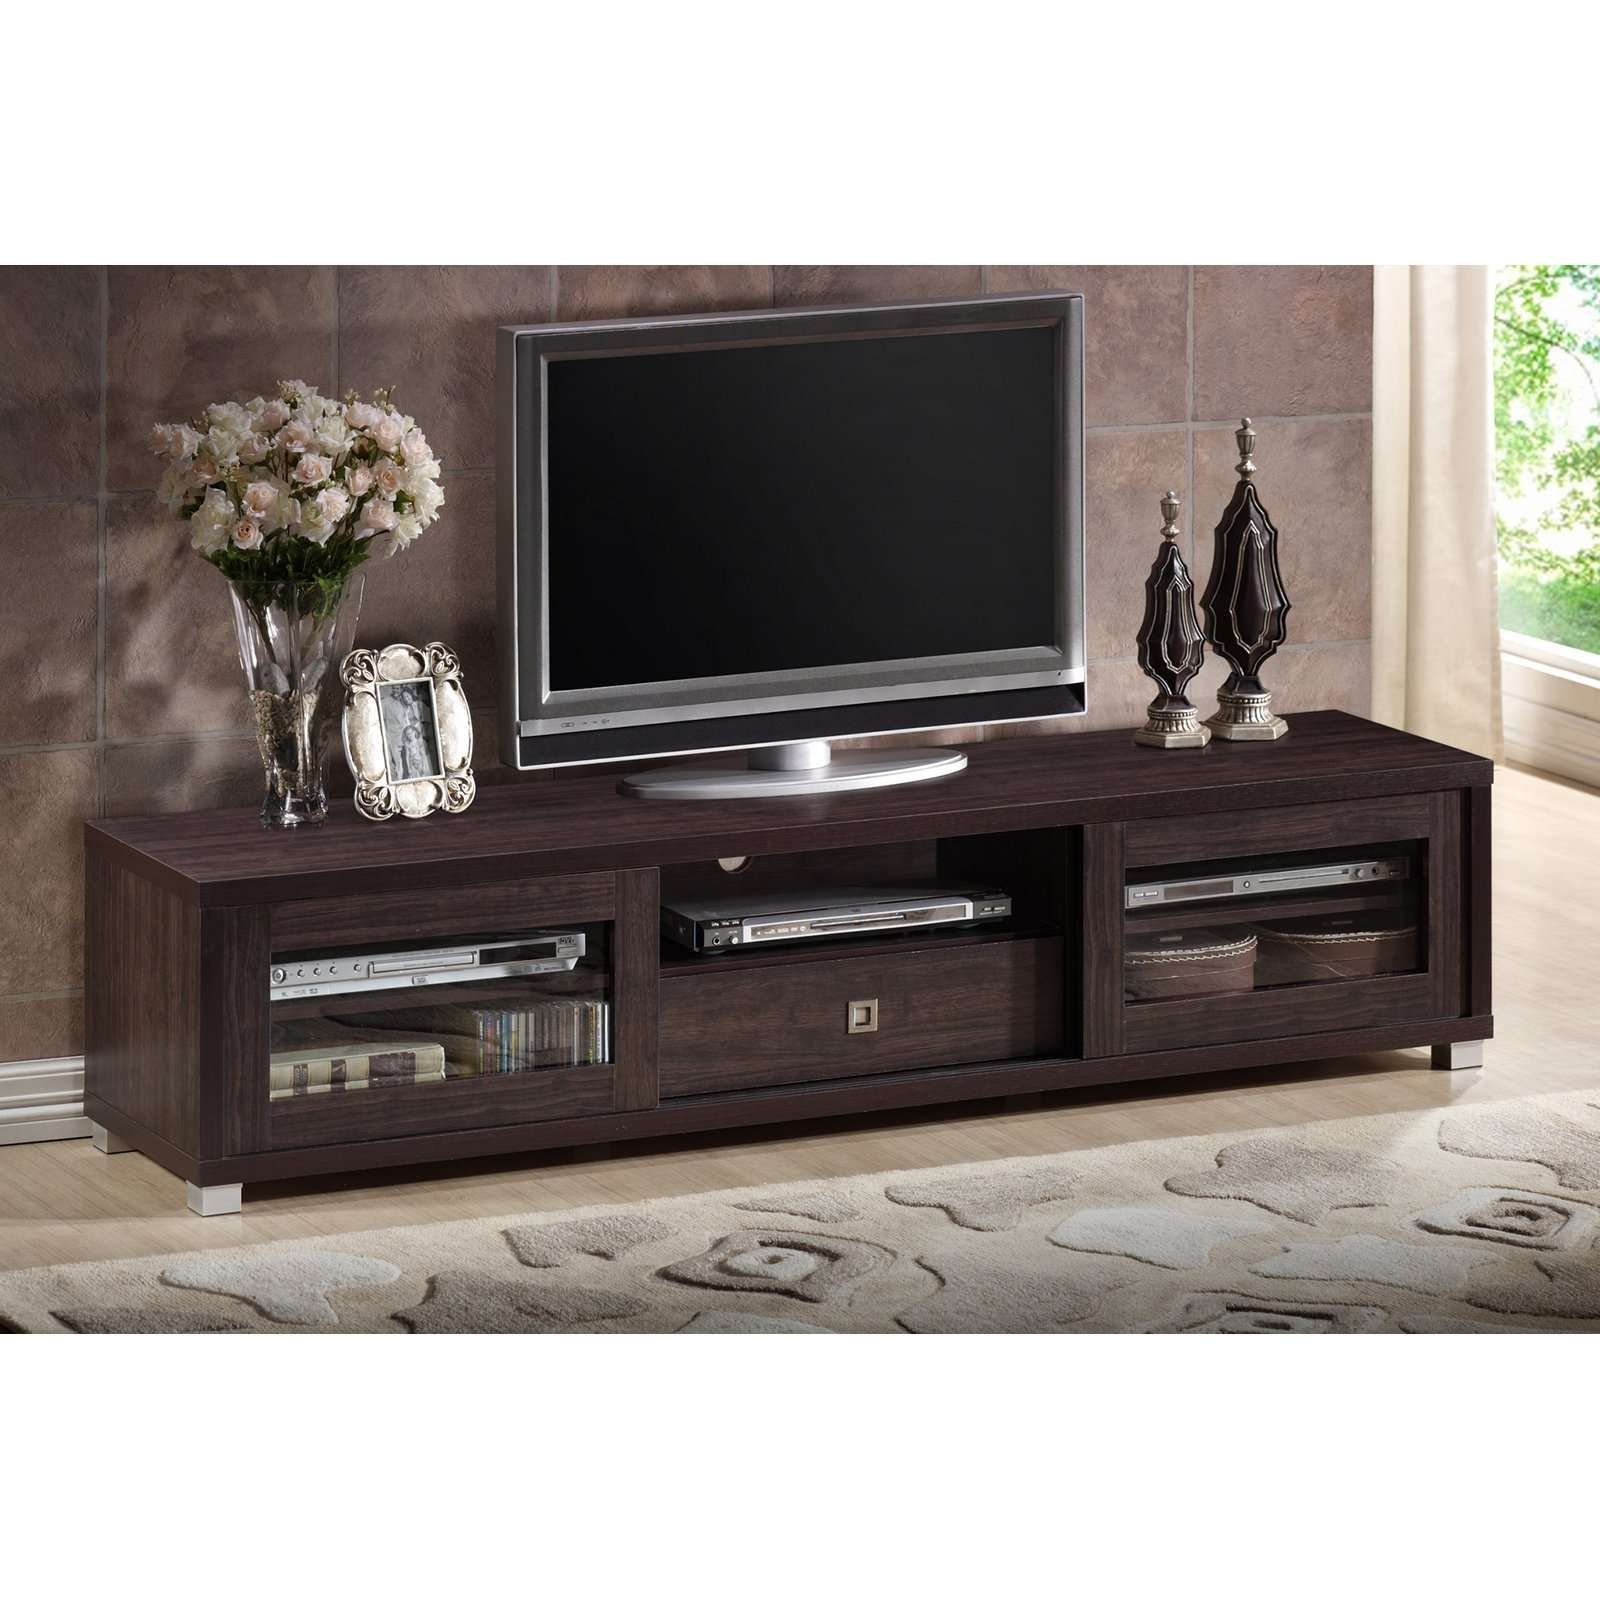 Altra Furniture Bailey 72 In. Tv Stand | Hayneedle For Contemporary Wood Tv Stands (Gallery 11 of 15)